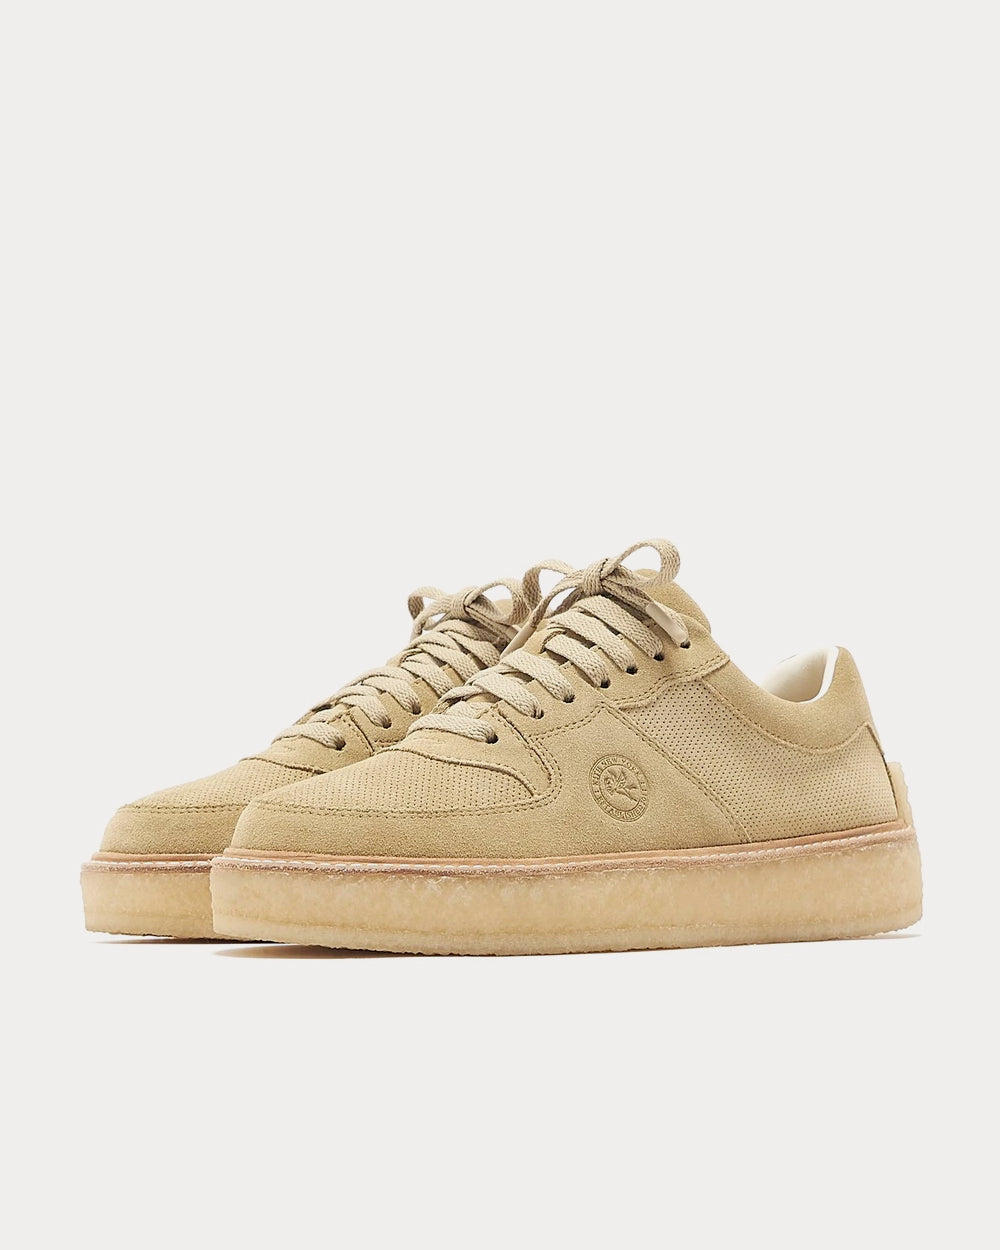 Clarks x Kith - Lockhill Suede Maple Low Top Sneakers